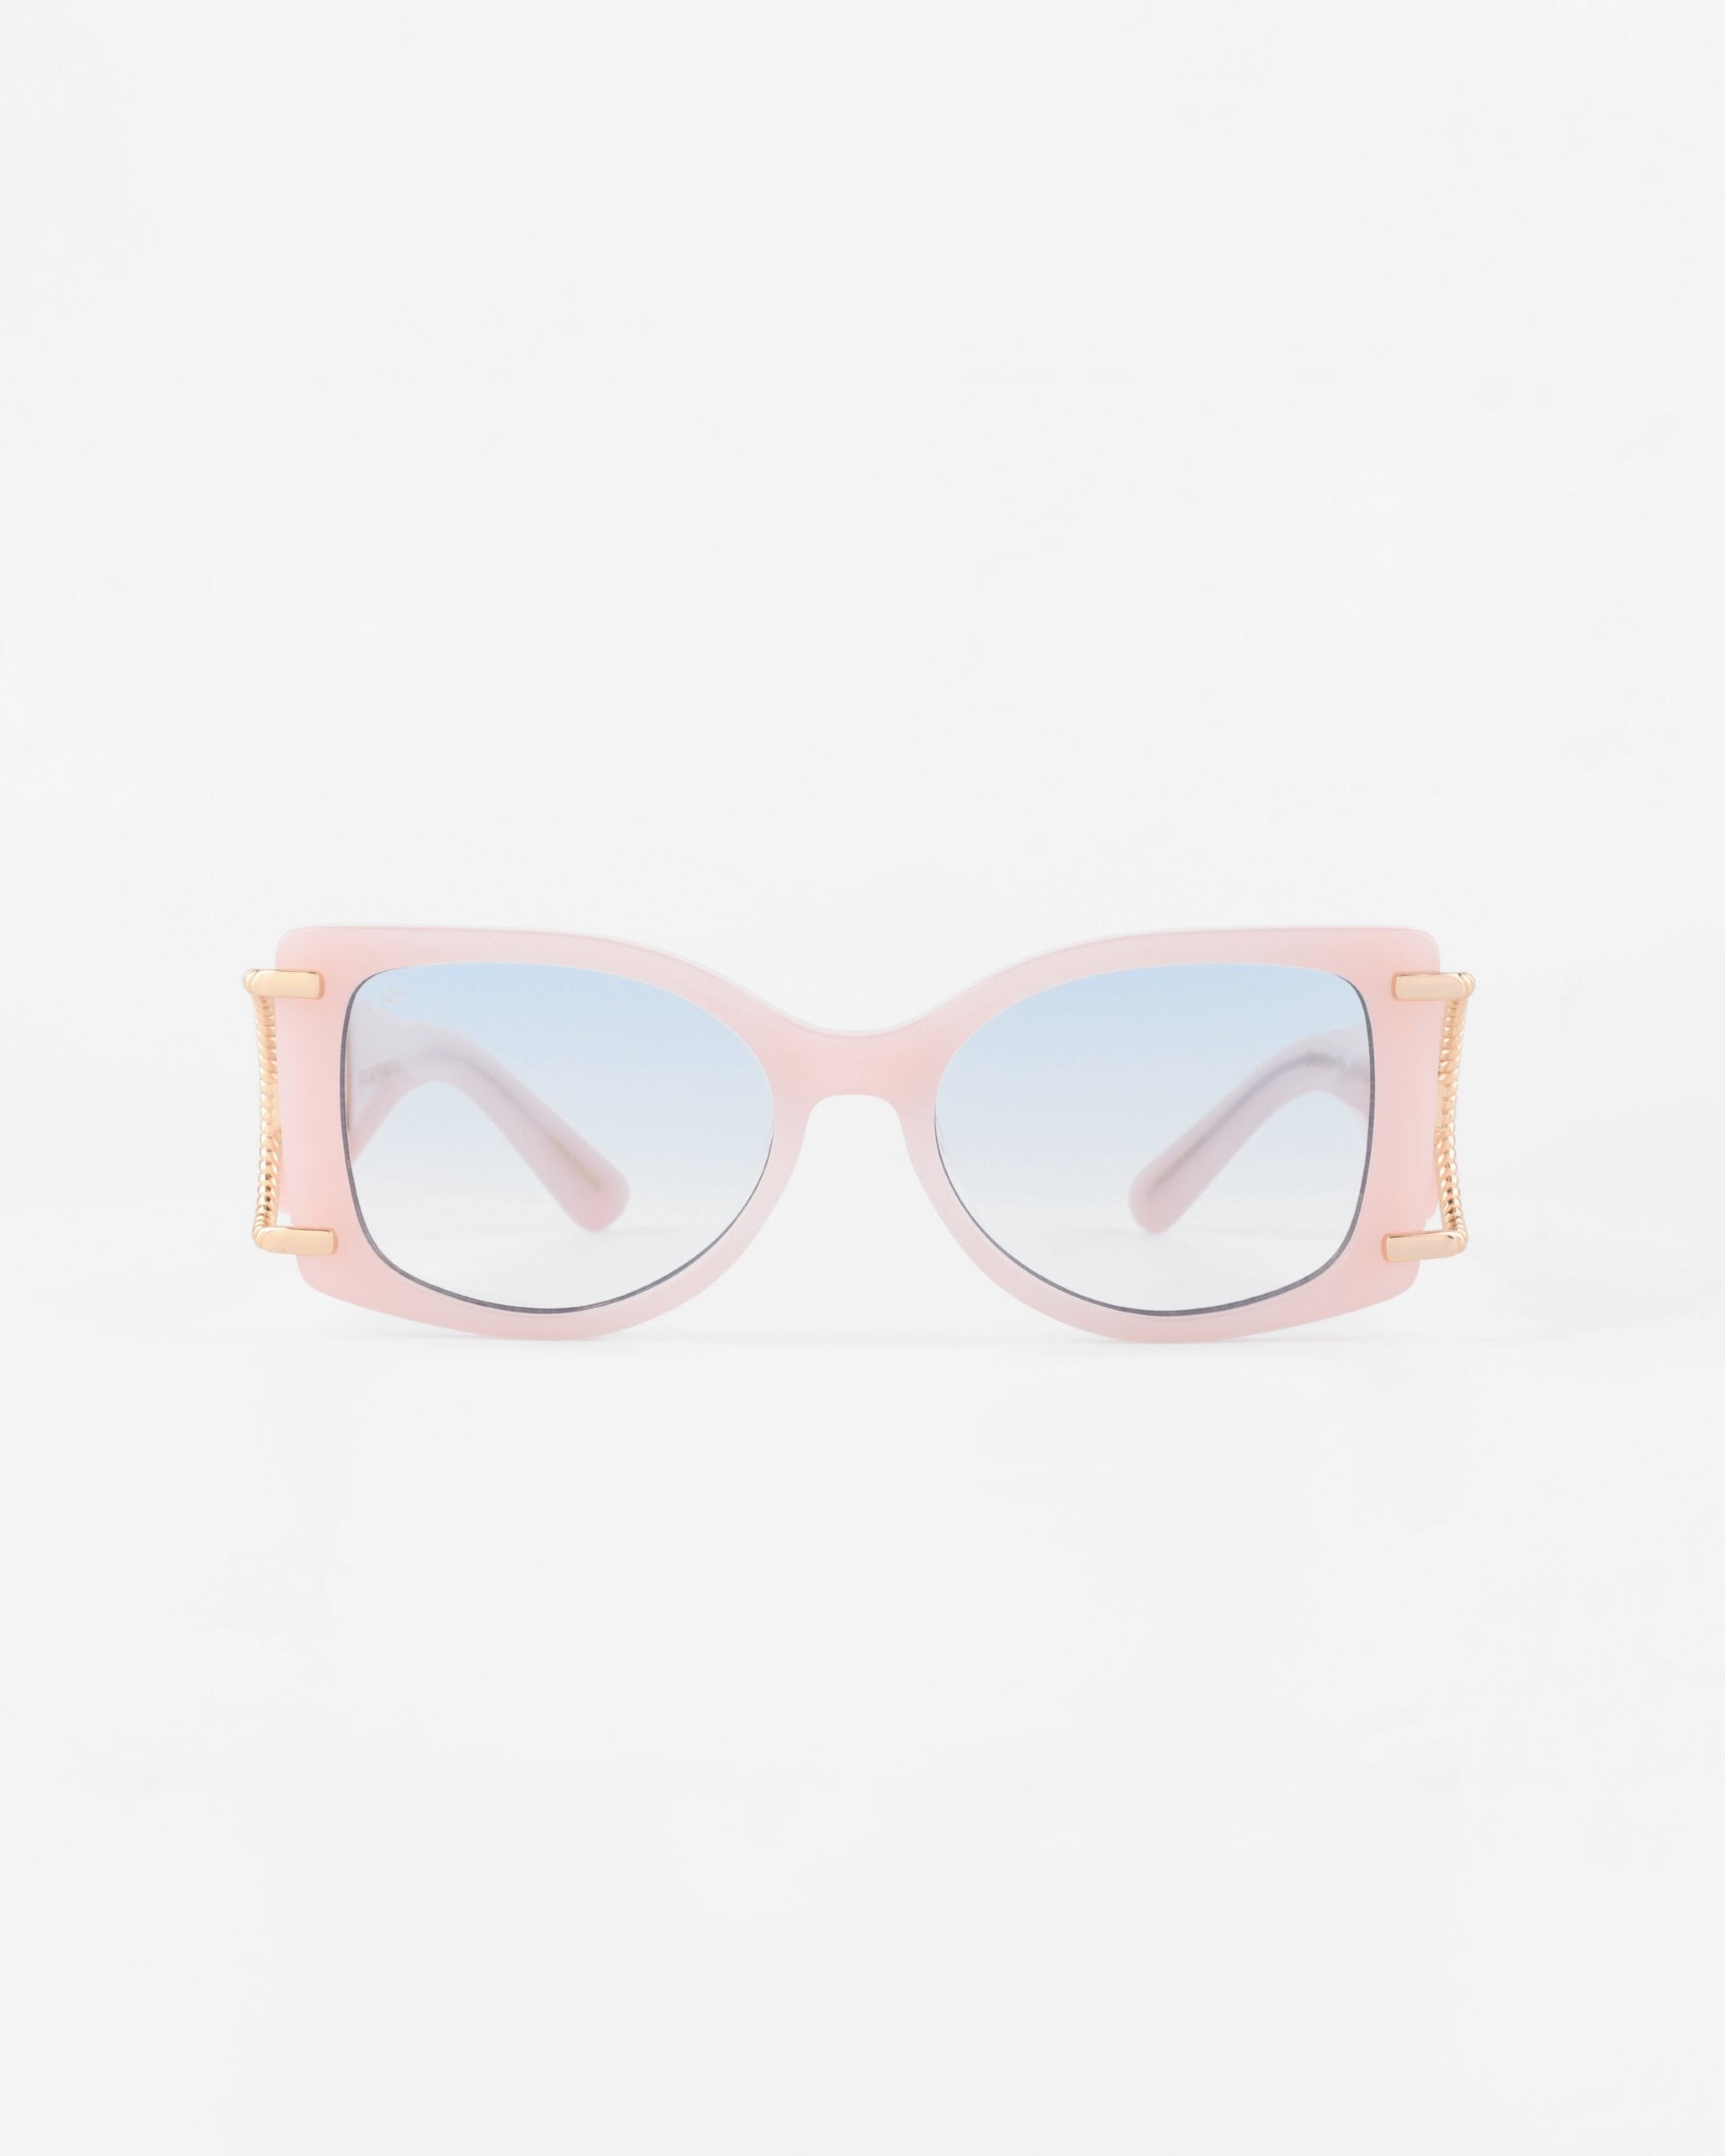 A pair of stylish pink oversized square acetate sunglasses with gradient lenses, named Sculpture by For Art&#39;s Sake®. The sunglasses feature 18-karat gold-plated accents on the temples and provide 100% UVA &amp; UVB protection. The background is plain white.